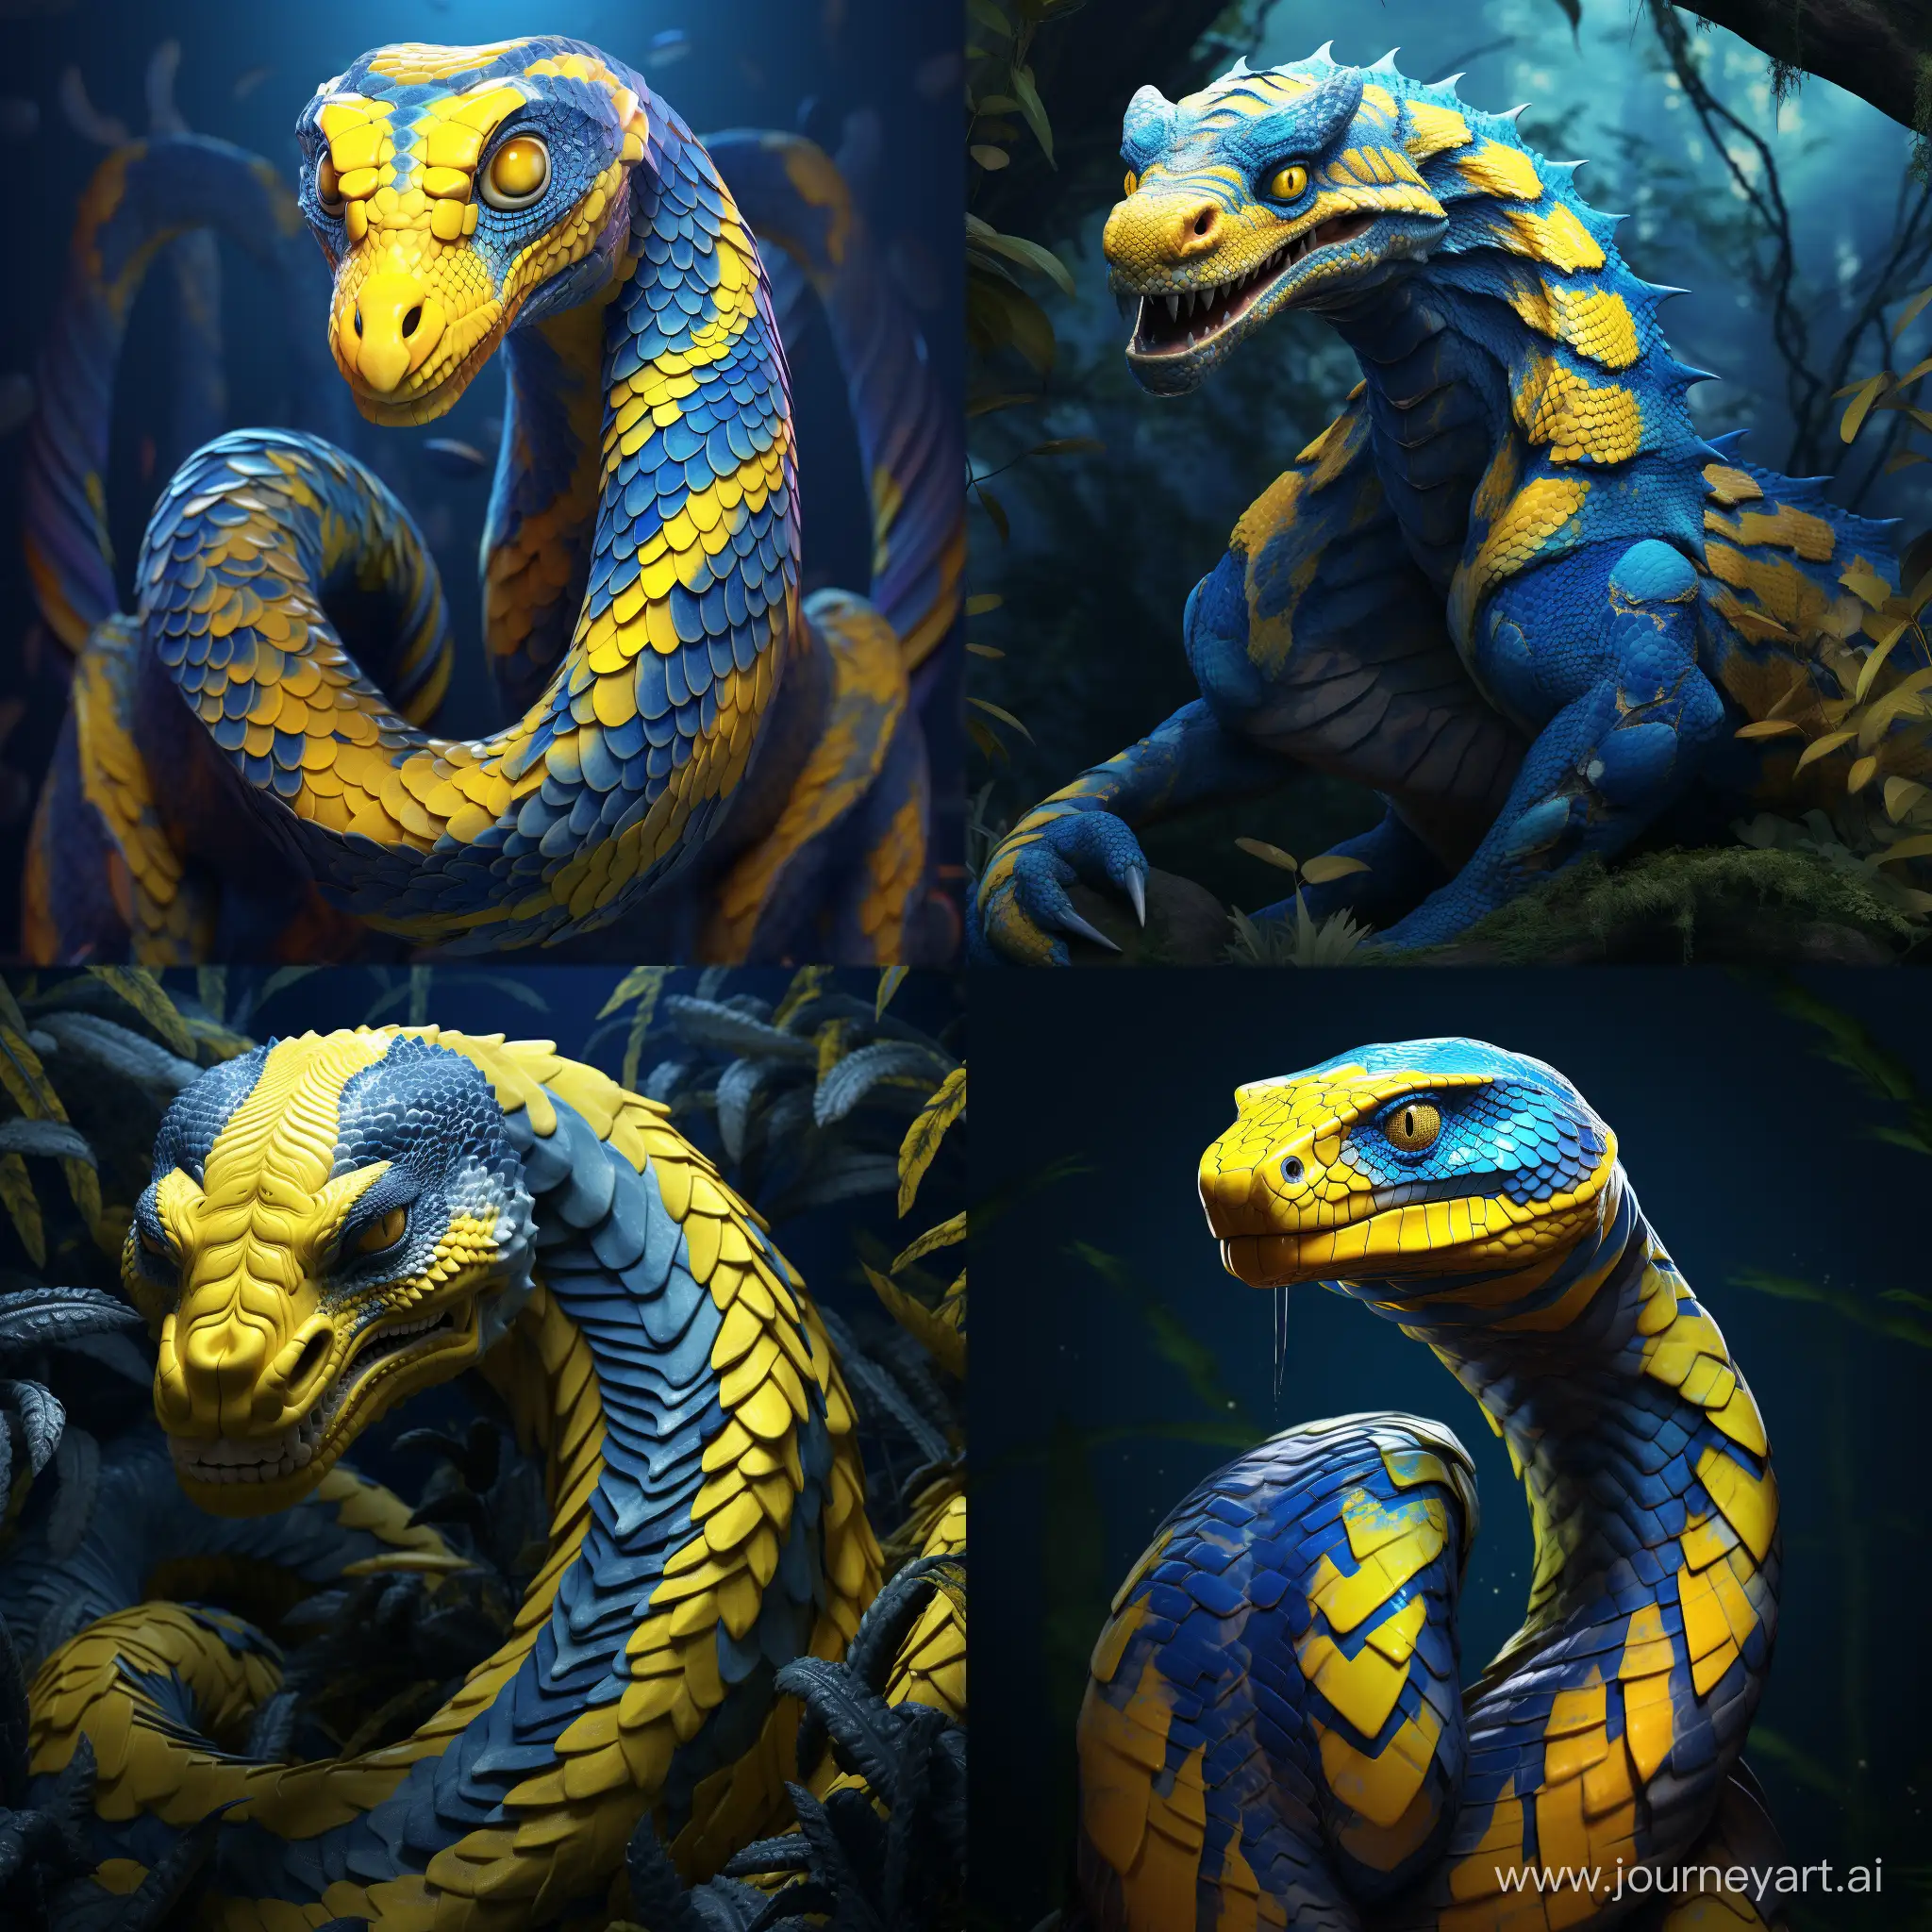 Yellow and blue python-inspired Dinosaur that looks like a symbol of Python